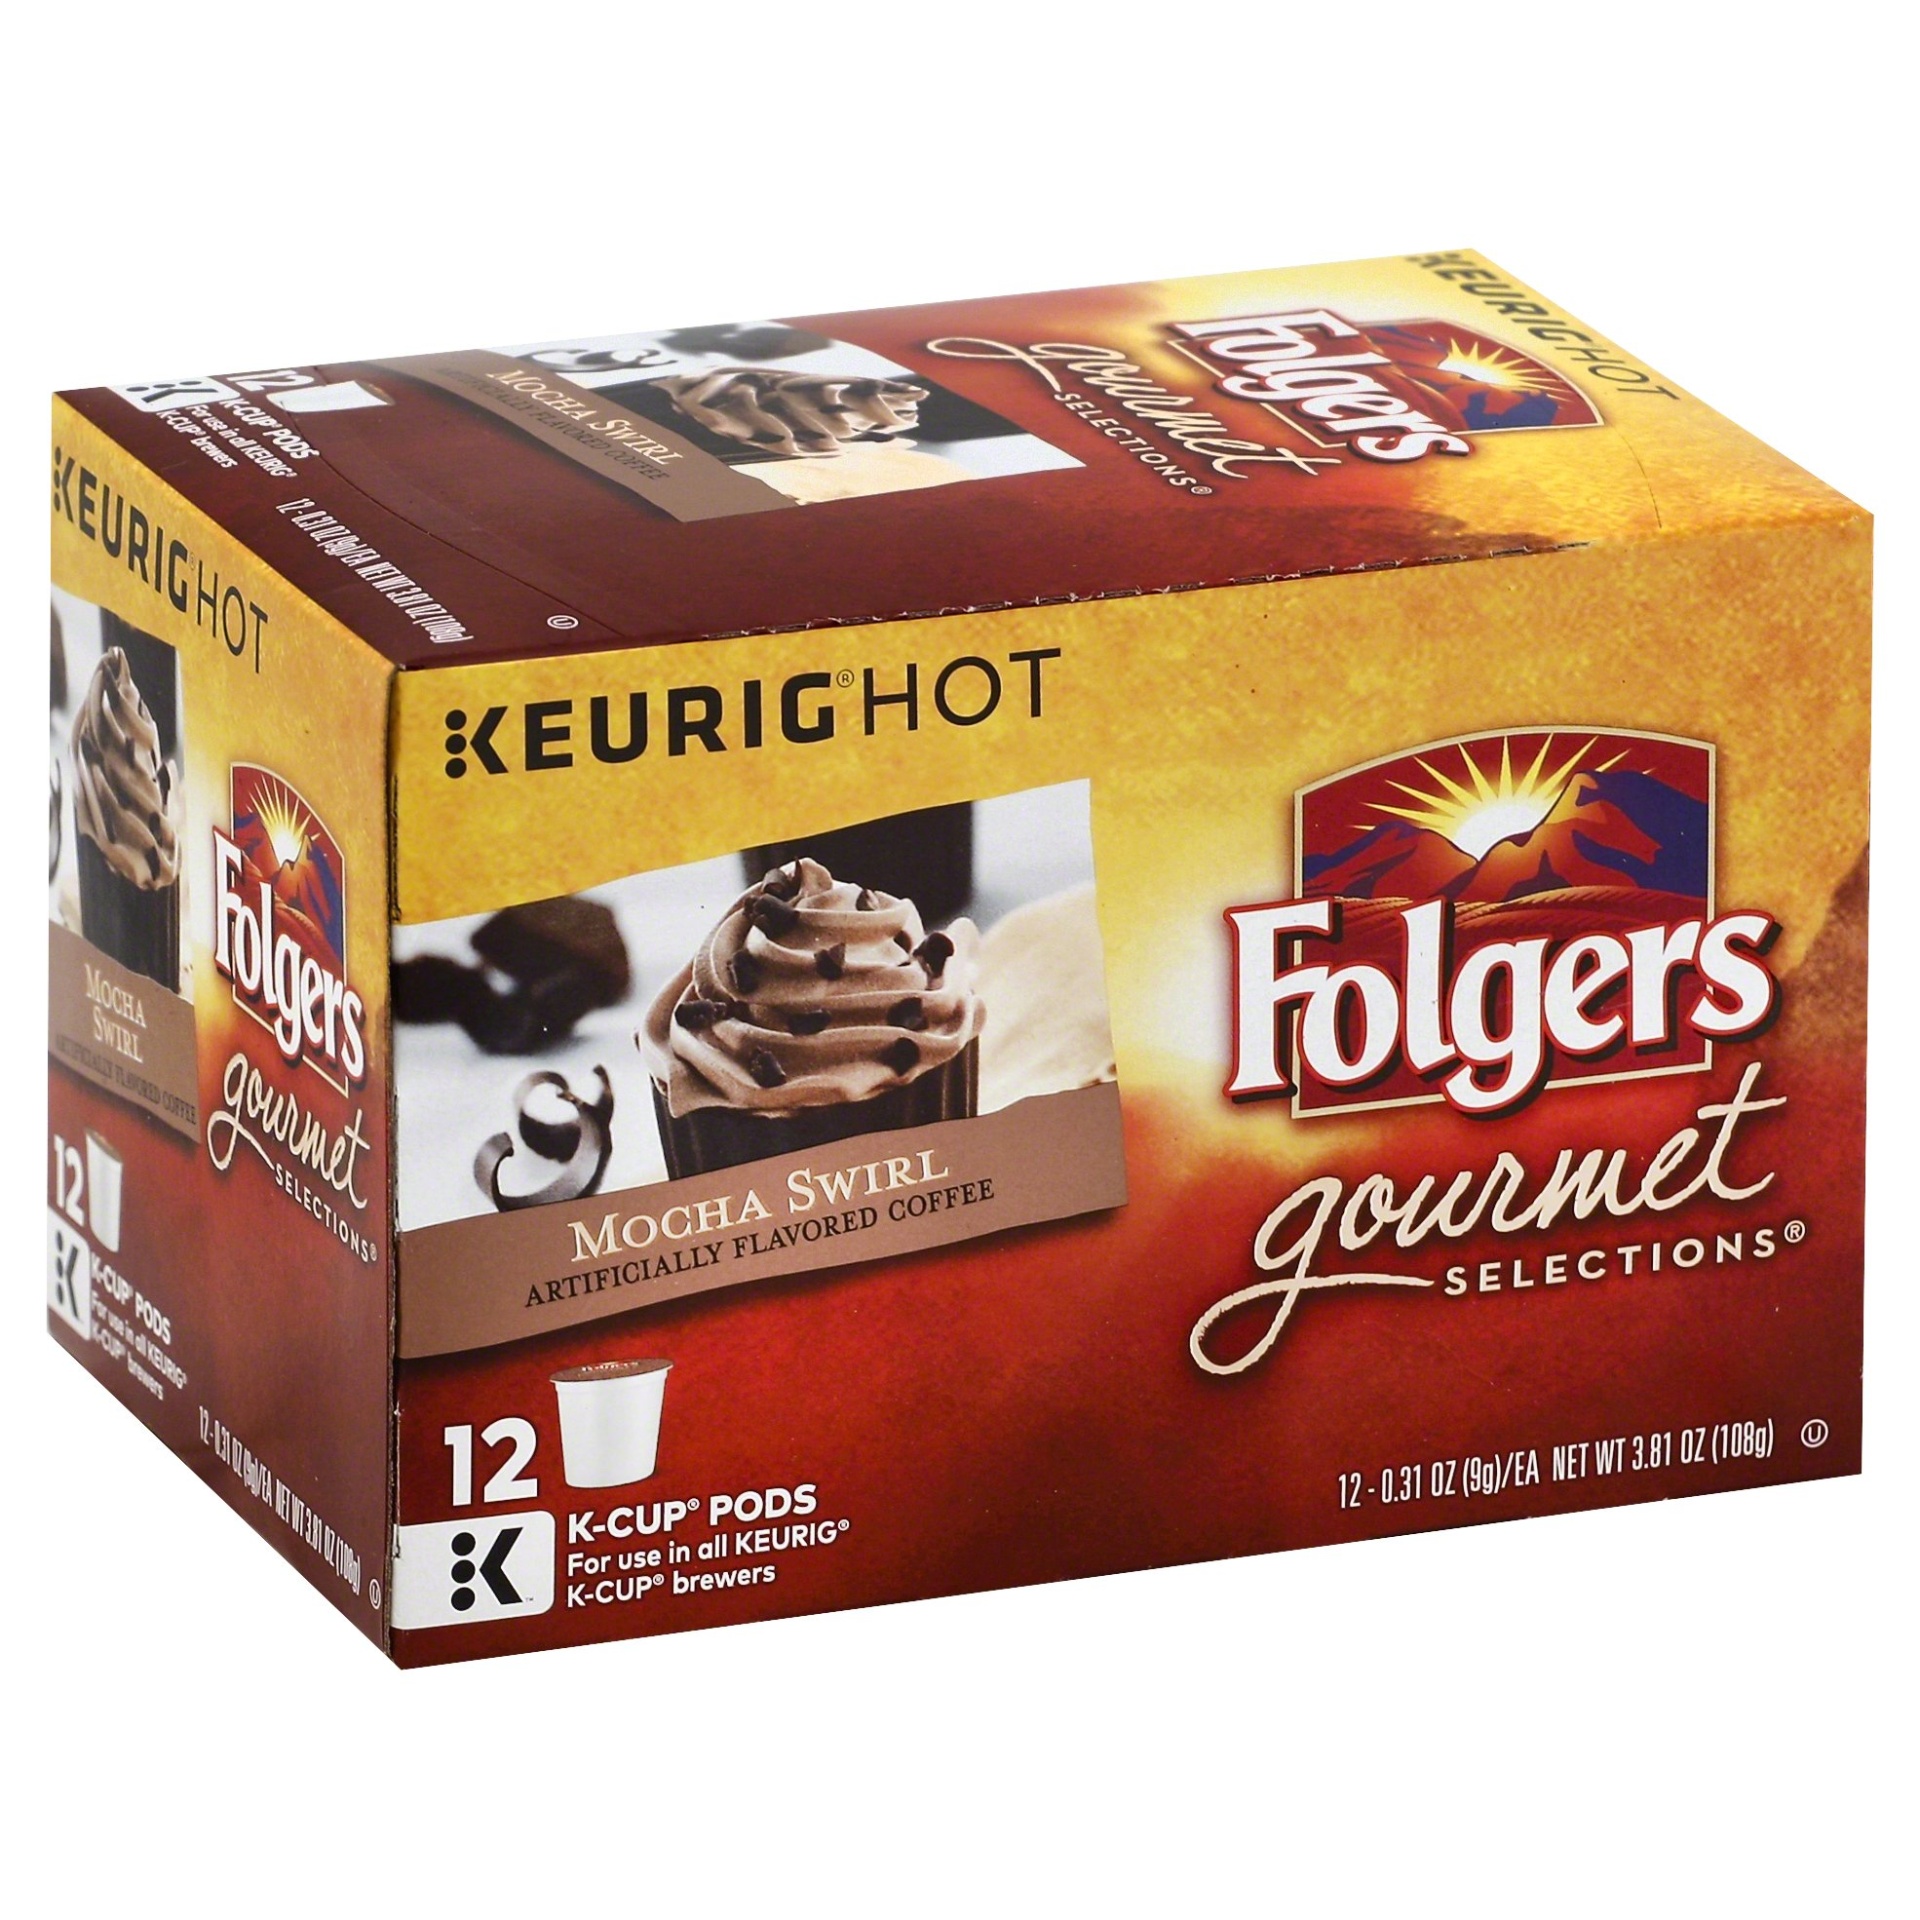 slide 1 of 1, Folgers Gourmet Selections Mocha Swirl Coffee K-Cup Pods, 12 ct